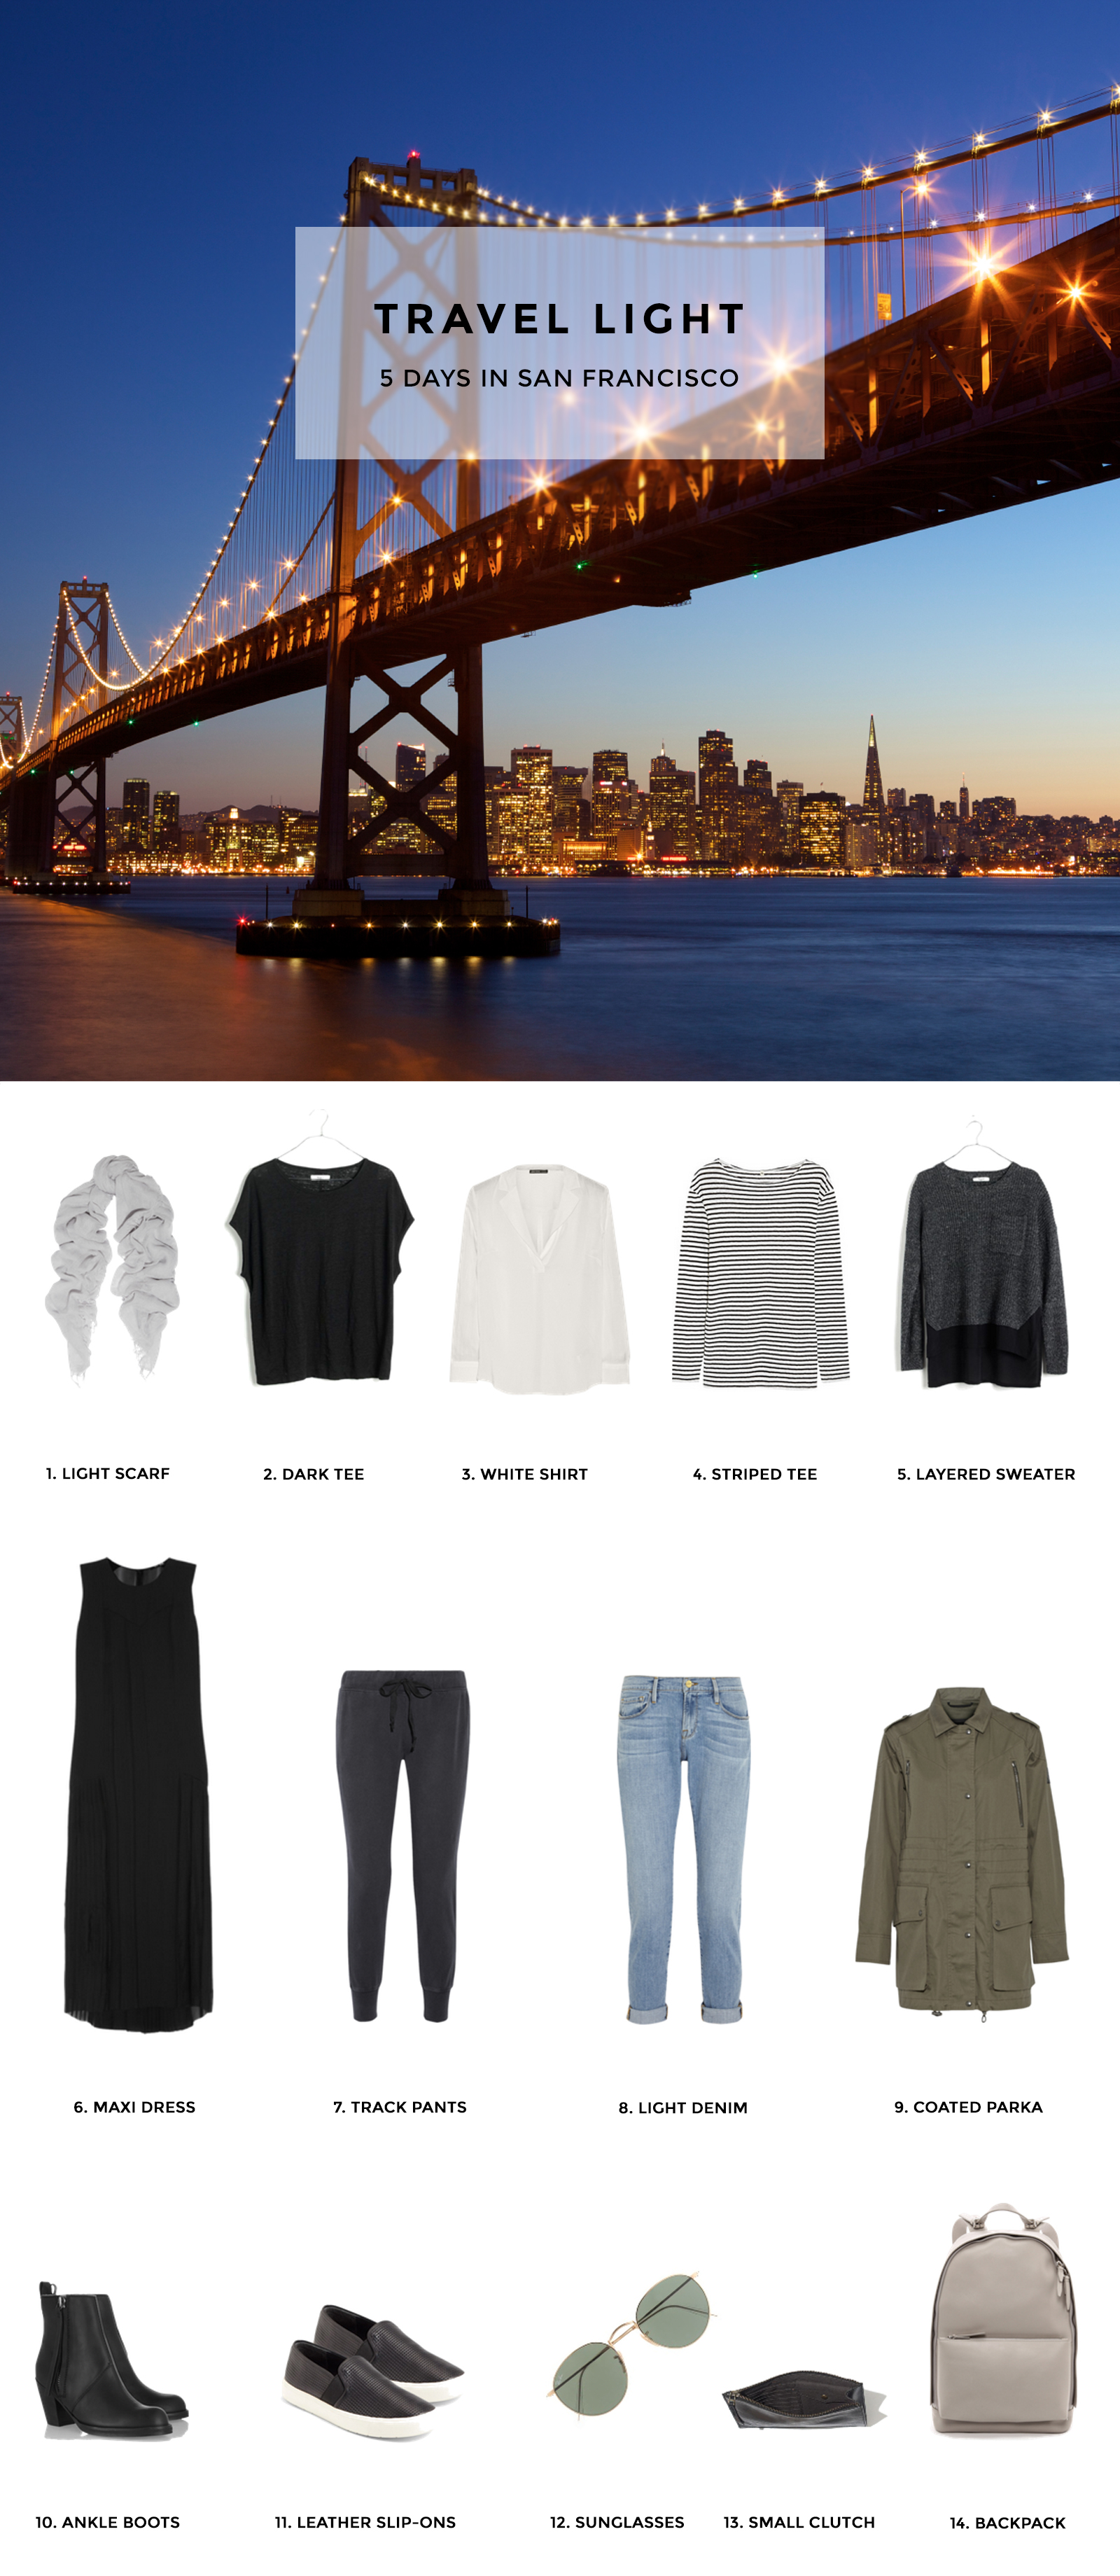 Travel Light - Pack for 5 Days in San Francisco - Includes packing list and outfits.